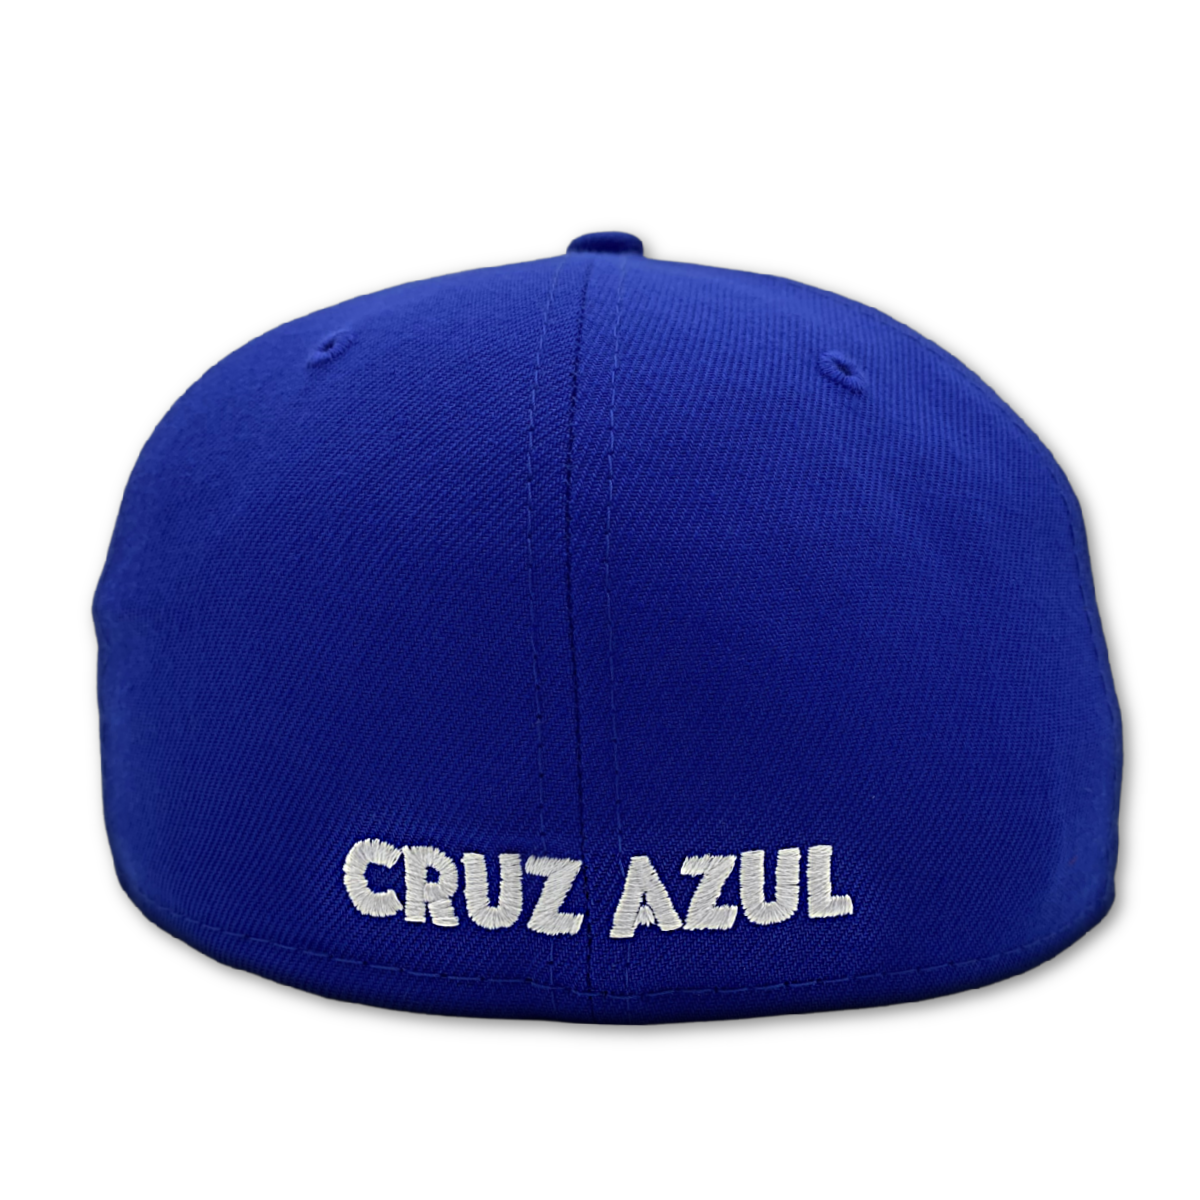 (AAAA) NEW ERA OFFICIAL CLUB CRUZ AZUL 59FIFTY FITTED HAT-ROYAL nvsoccer.com The Coliseum